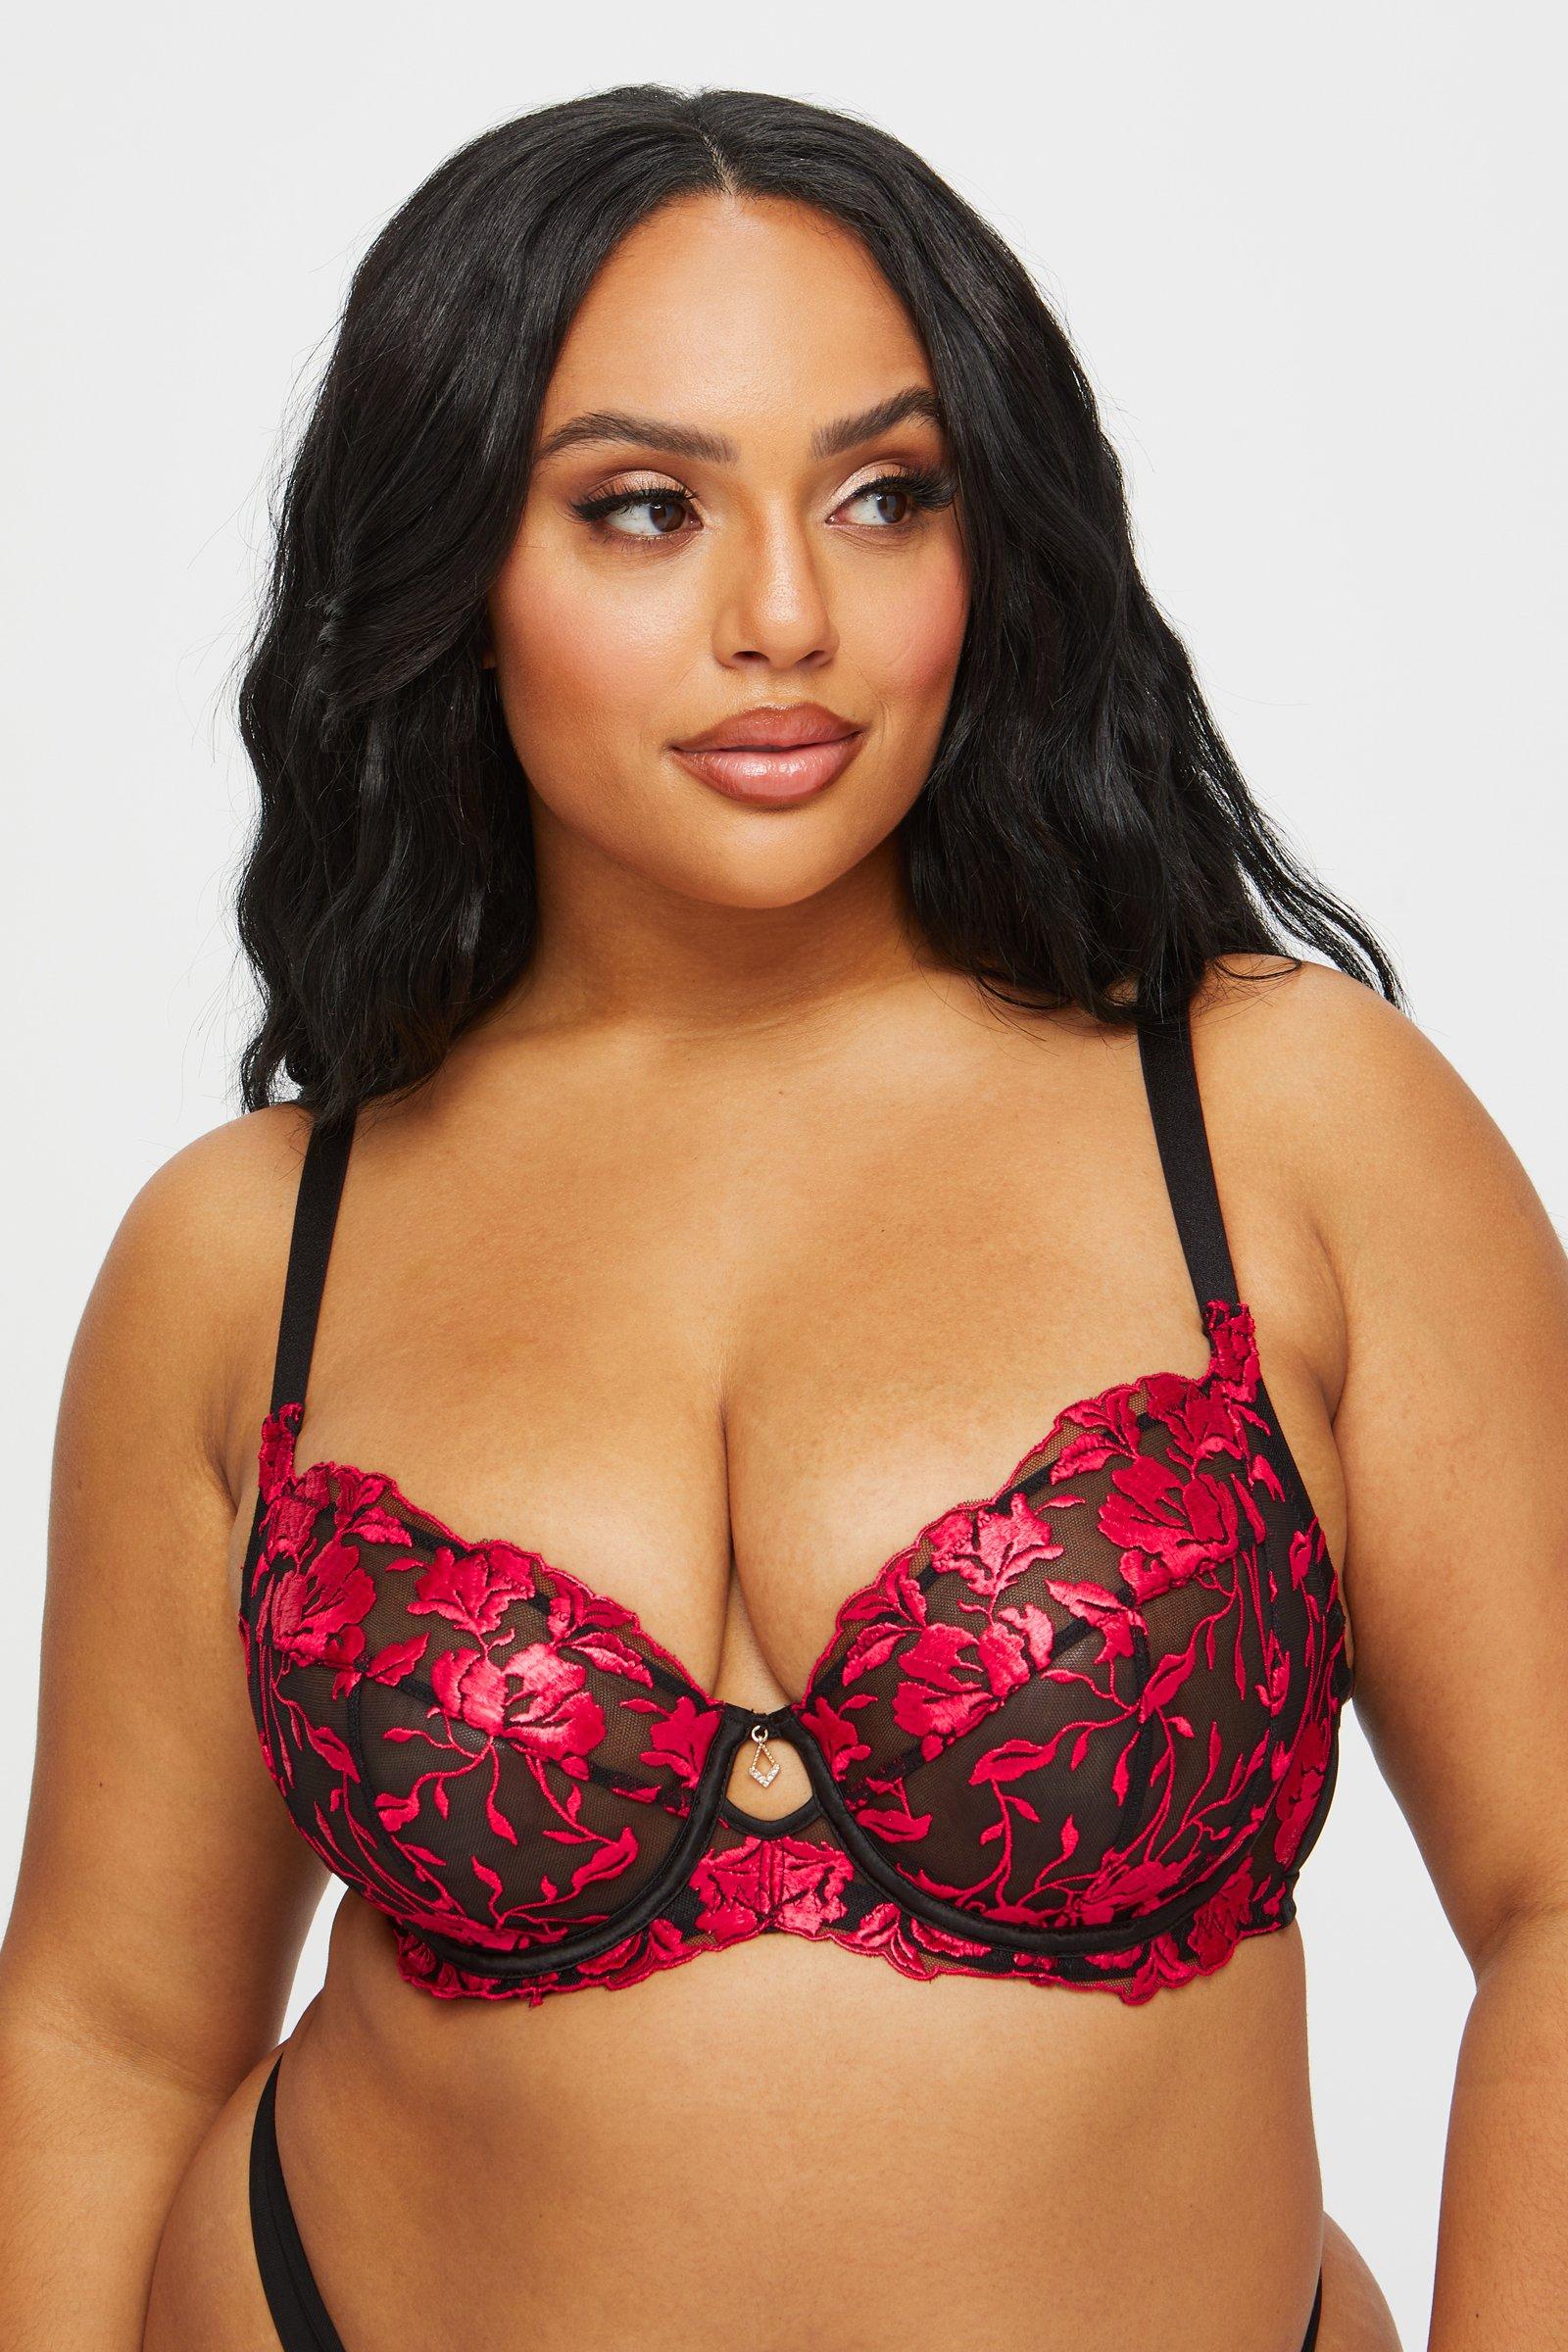 The Hero Fuller Bust DD+ Non Pad Plunge Black/Red